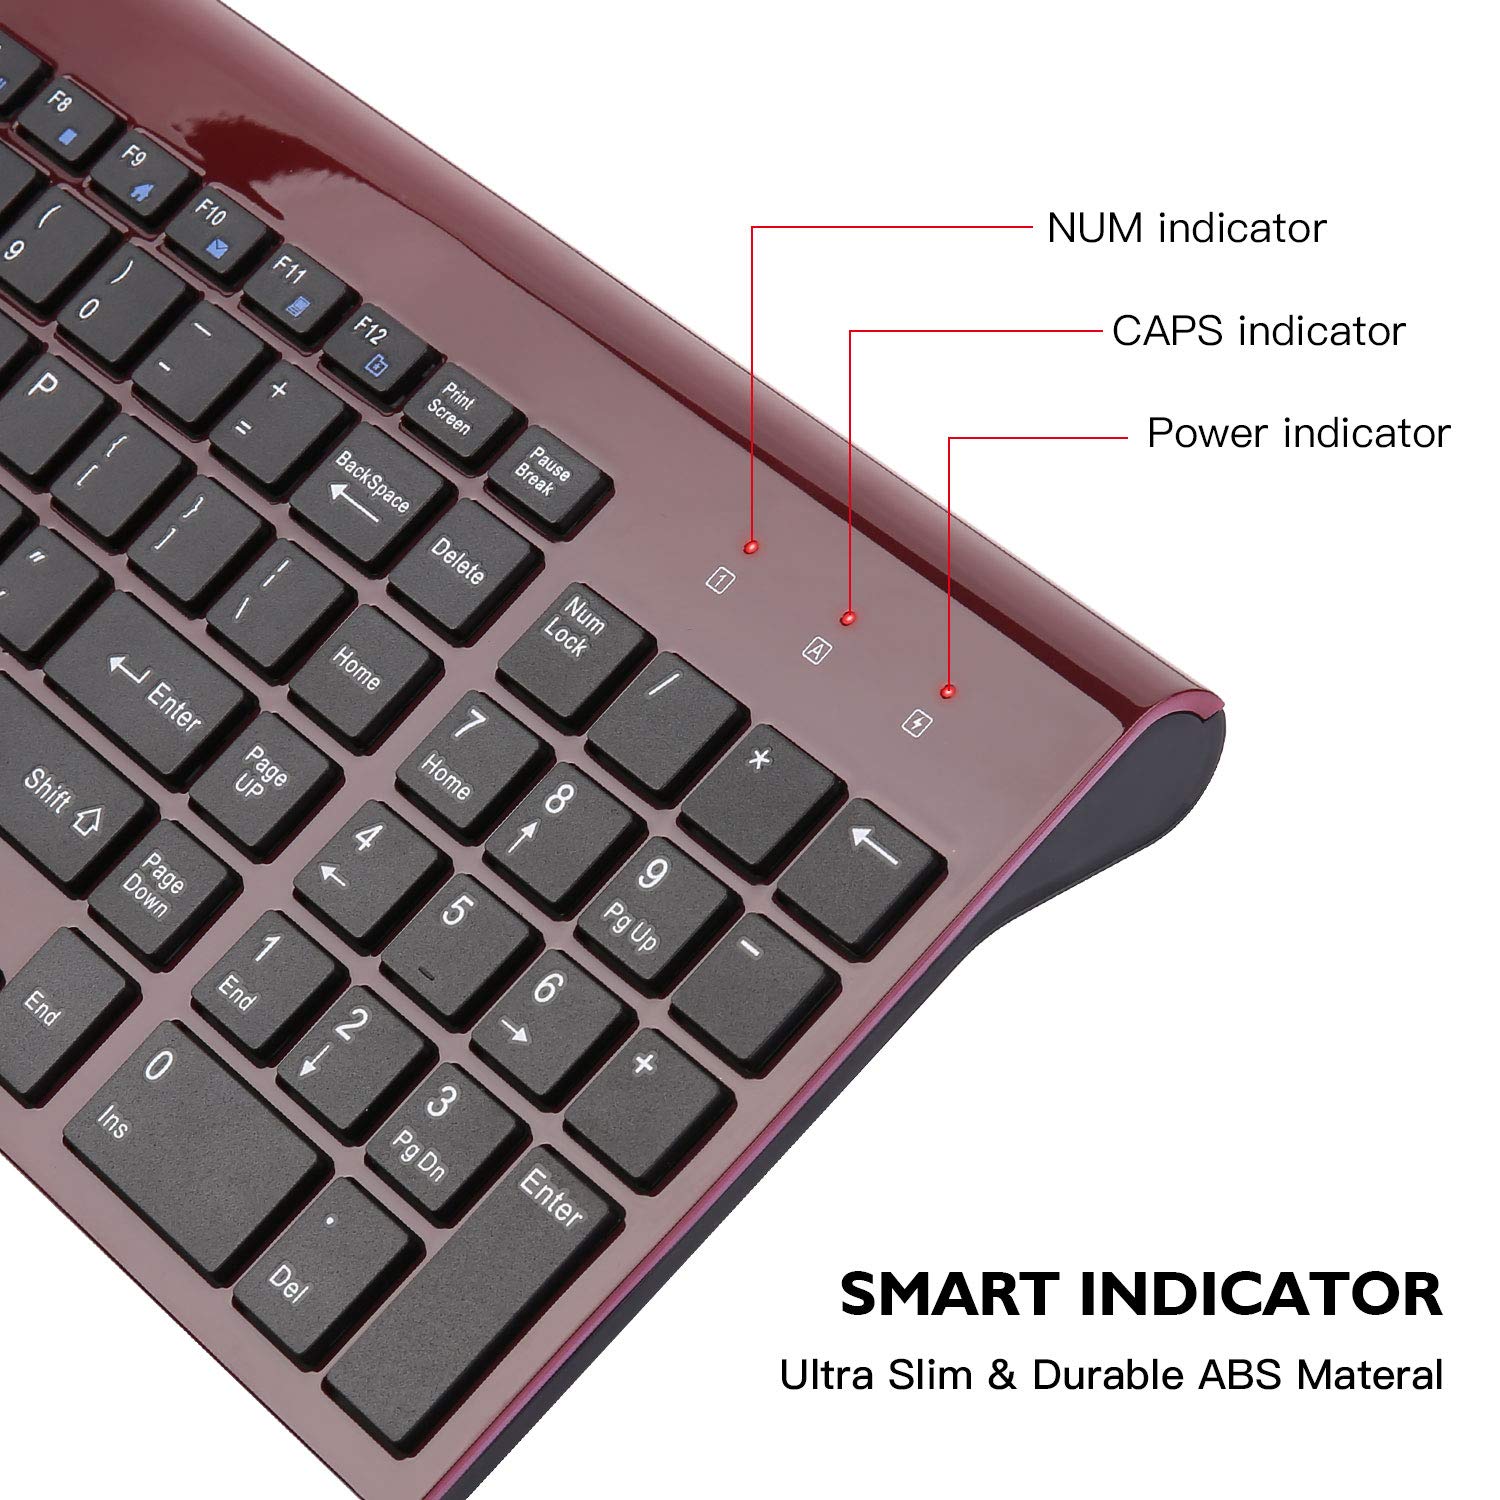 Wireless Keyboard and Mouse Combo, cimetech Compact Full Size Wireless Keyboard and Mouse Set 2.4G Ultra-Thin Sleek Design for Windows, Computer, Desktop, PC, Notebook - (Wine red)